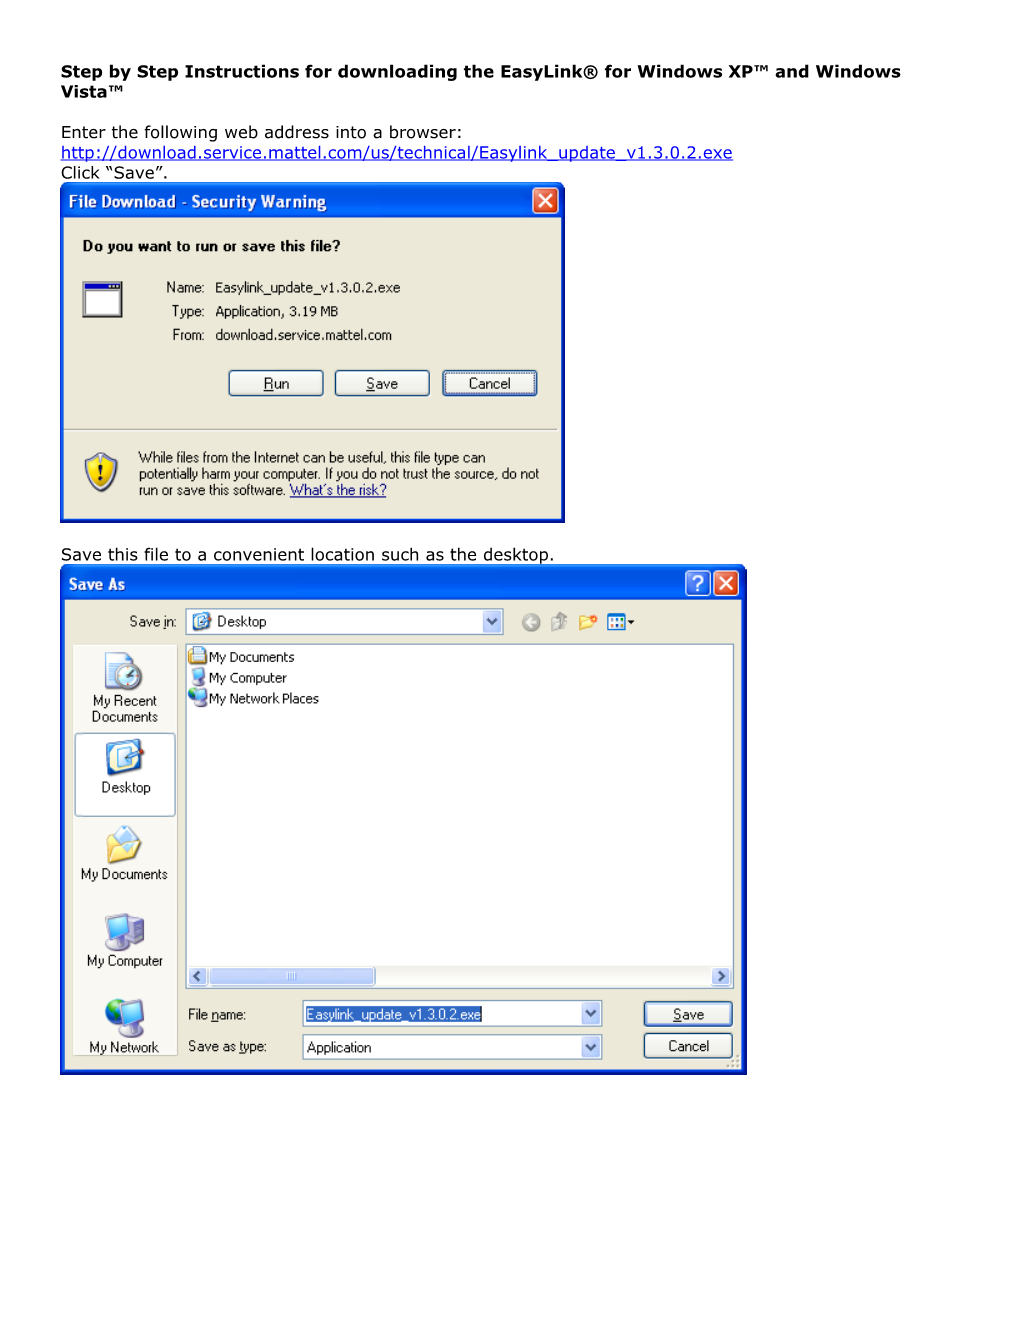 Step by Step Instructions for Downloading the Easylink for Windows XP and Windows Vista